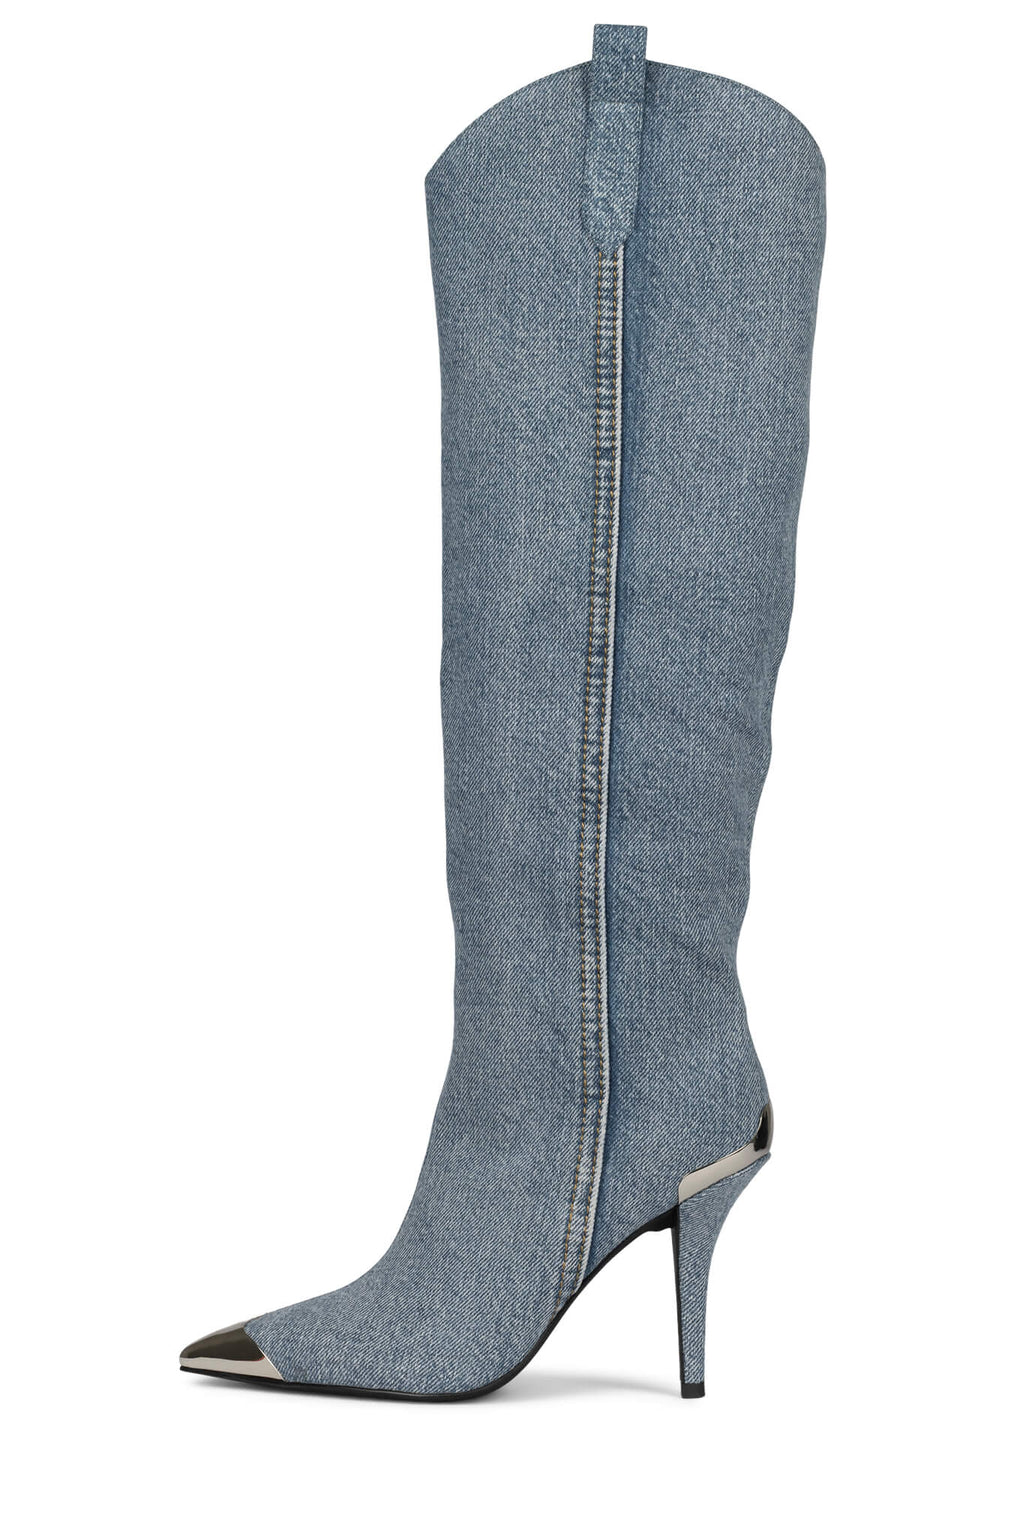 BY-GOLLY Knee-High Boot Jeffrey Campbell Blue Acid Wash Denim Silver 6 